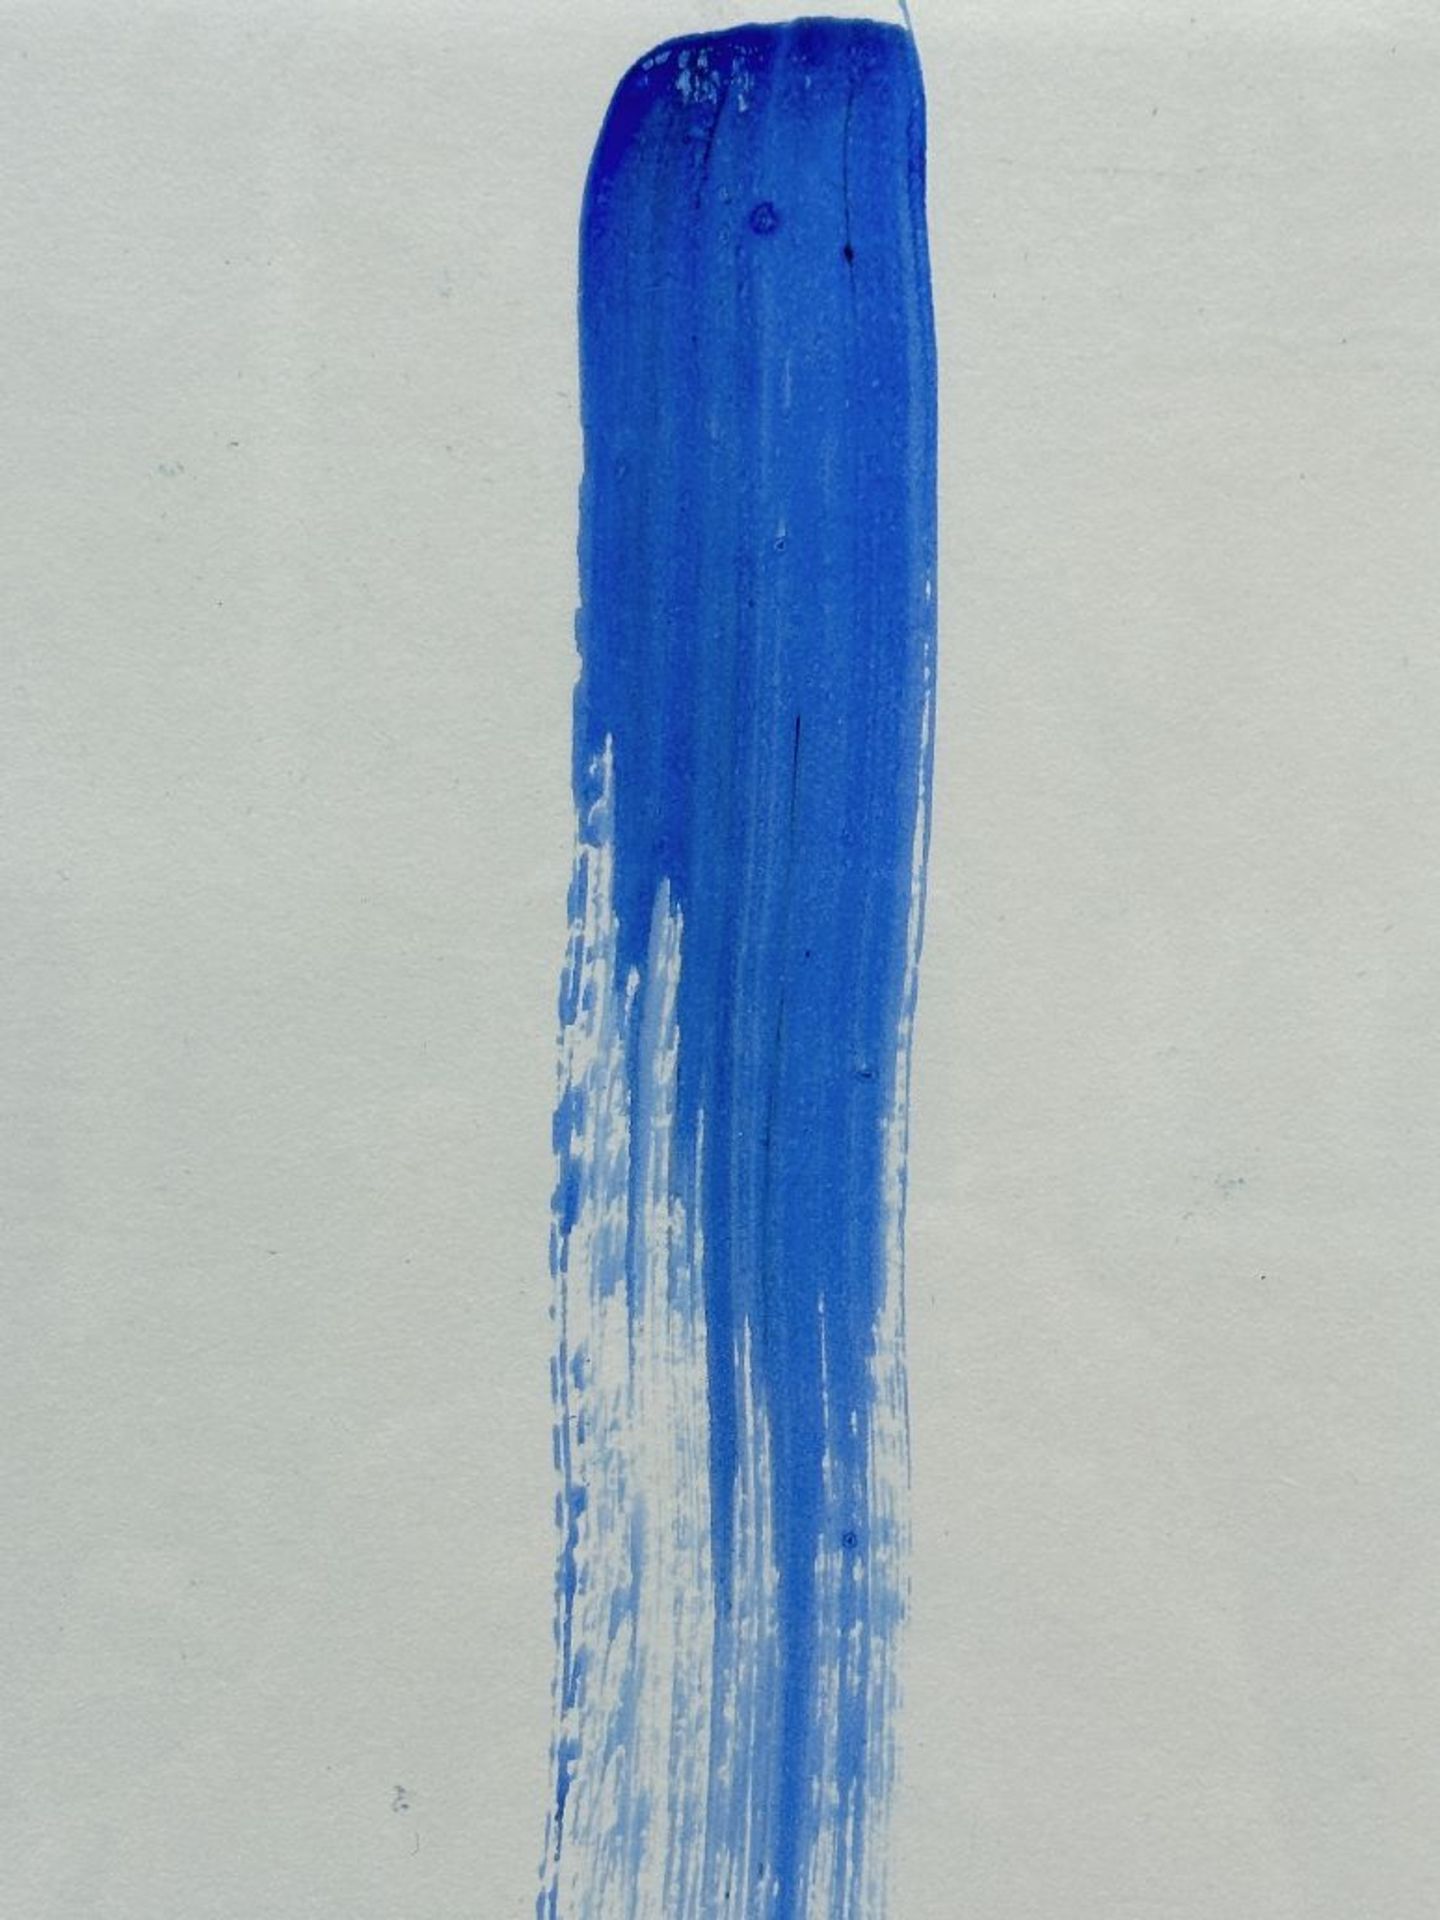 Lee Ufan (possibly by his hand): work on paper 'blue brush stroke' - Image 4 of 5